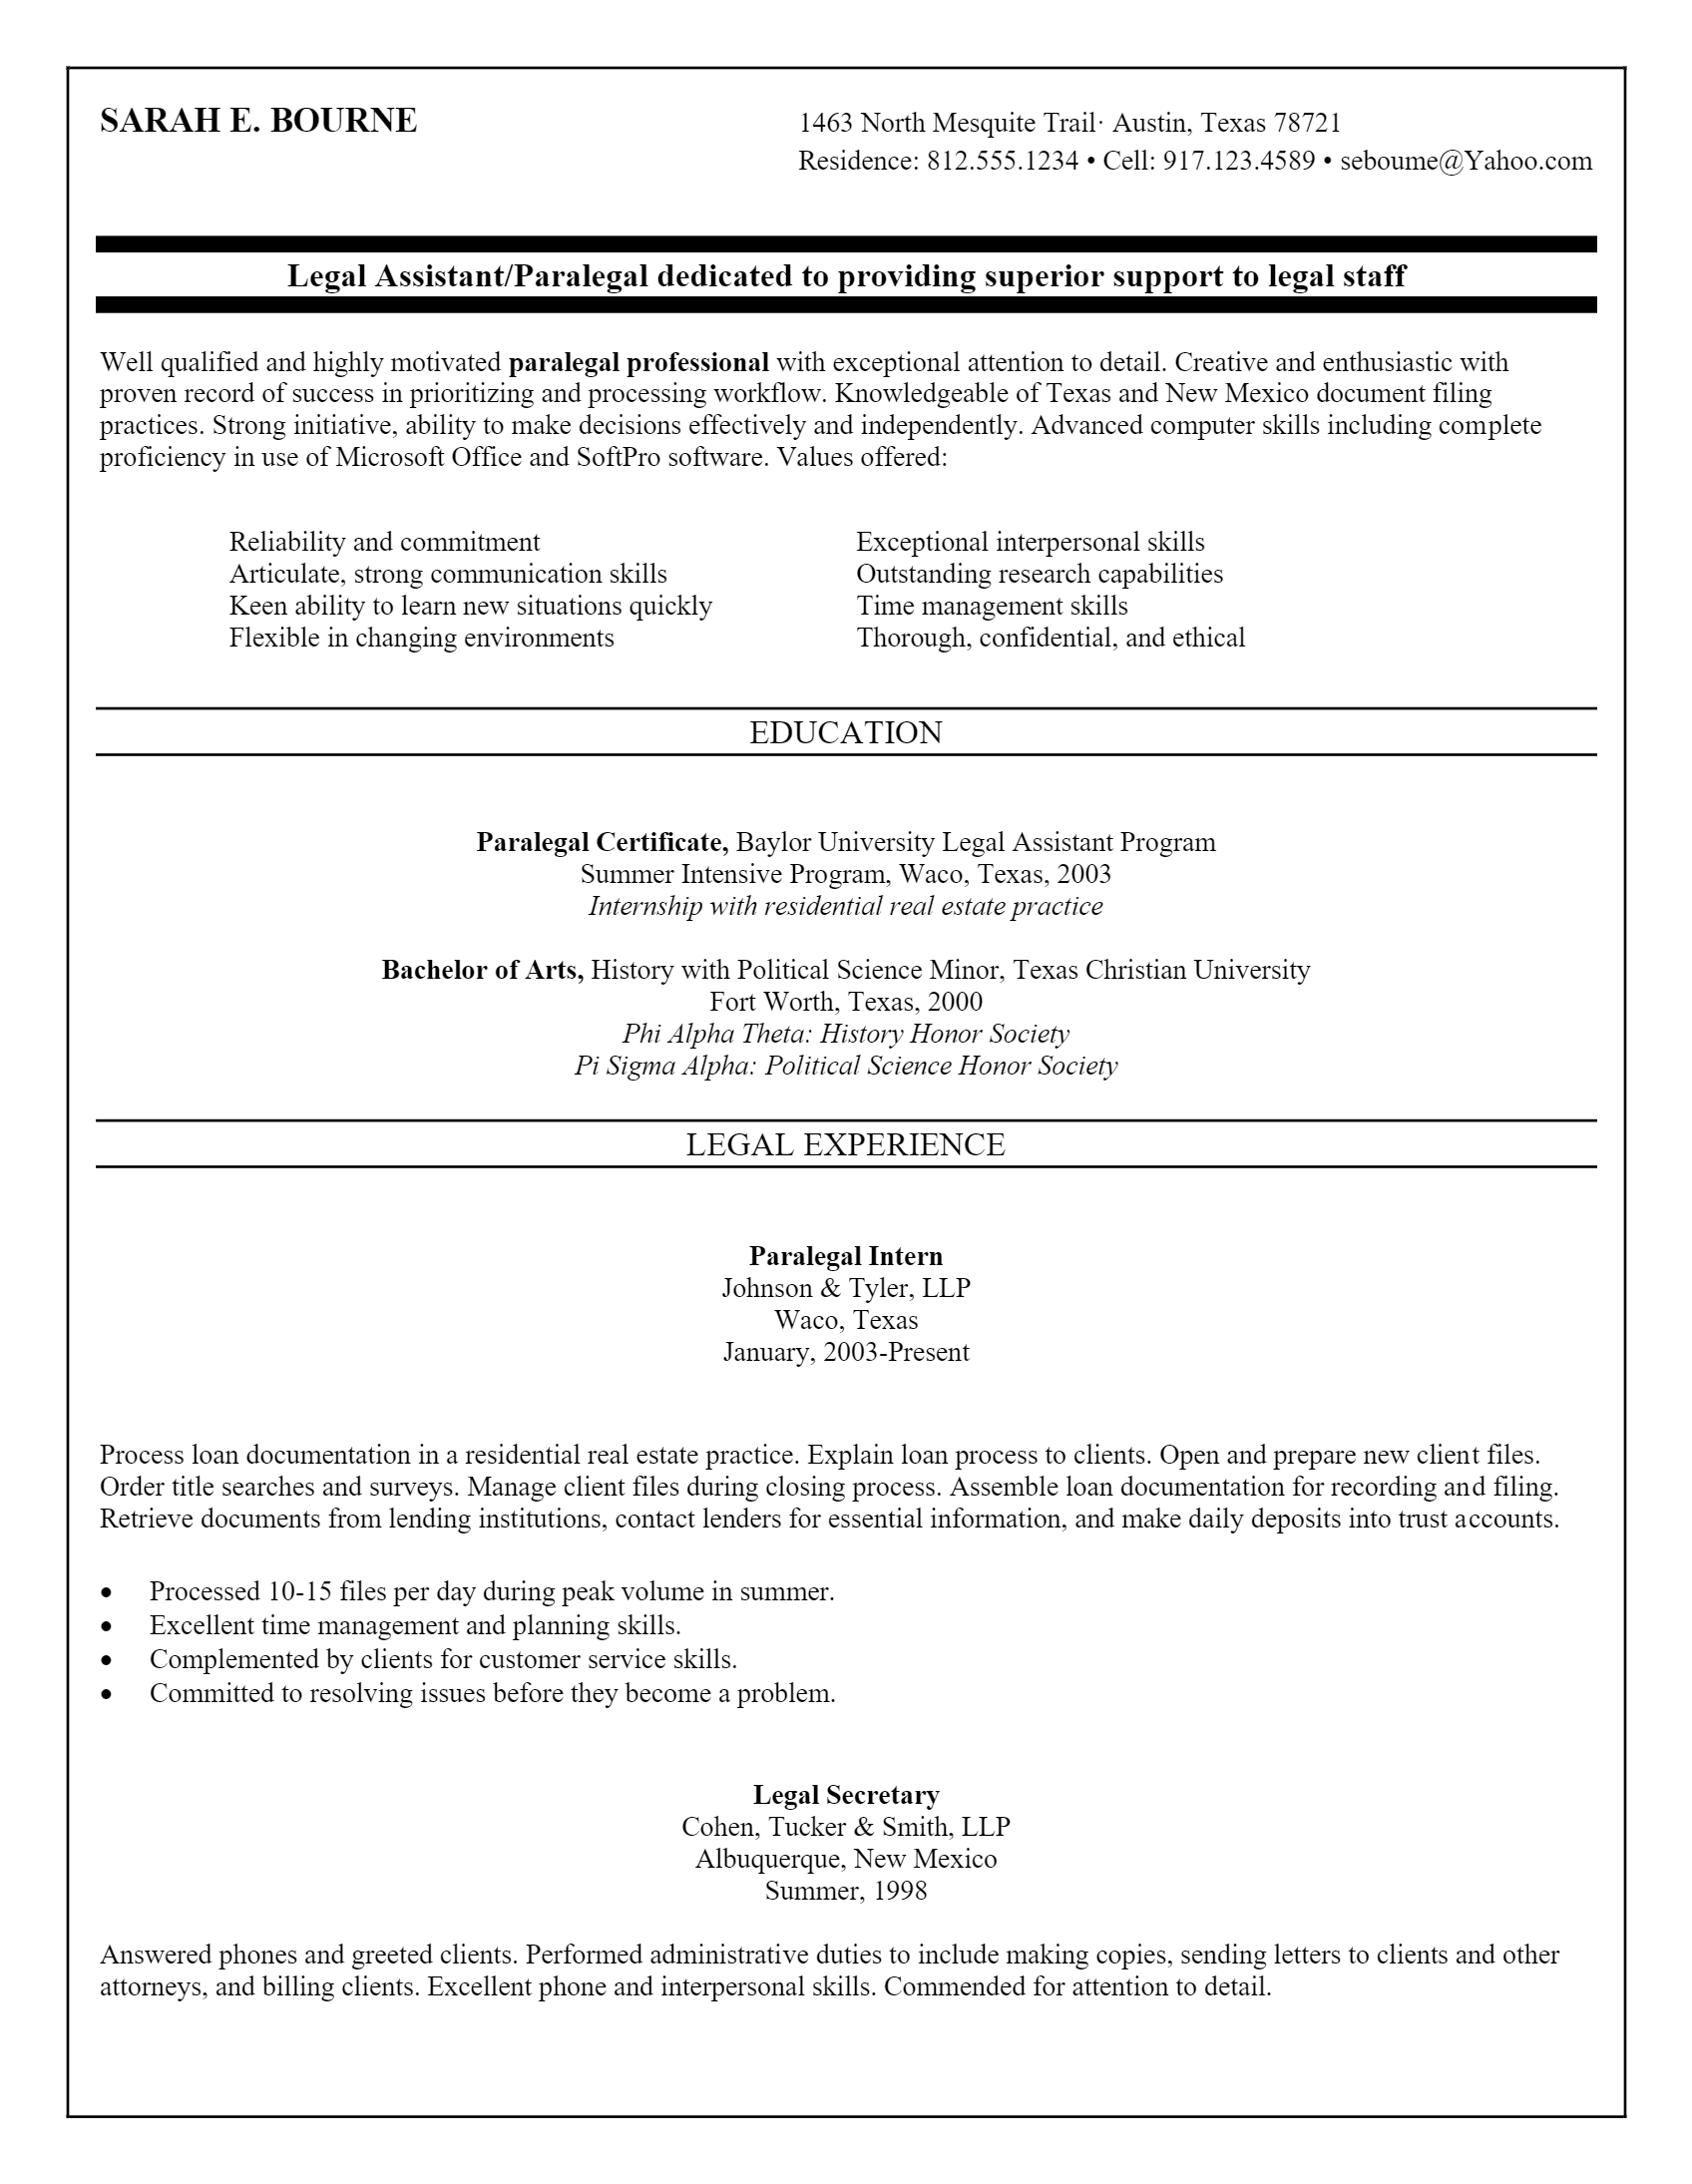 Paralegal Resume .Docx (Word)